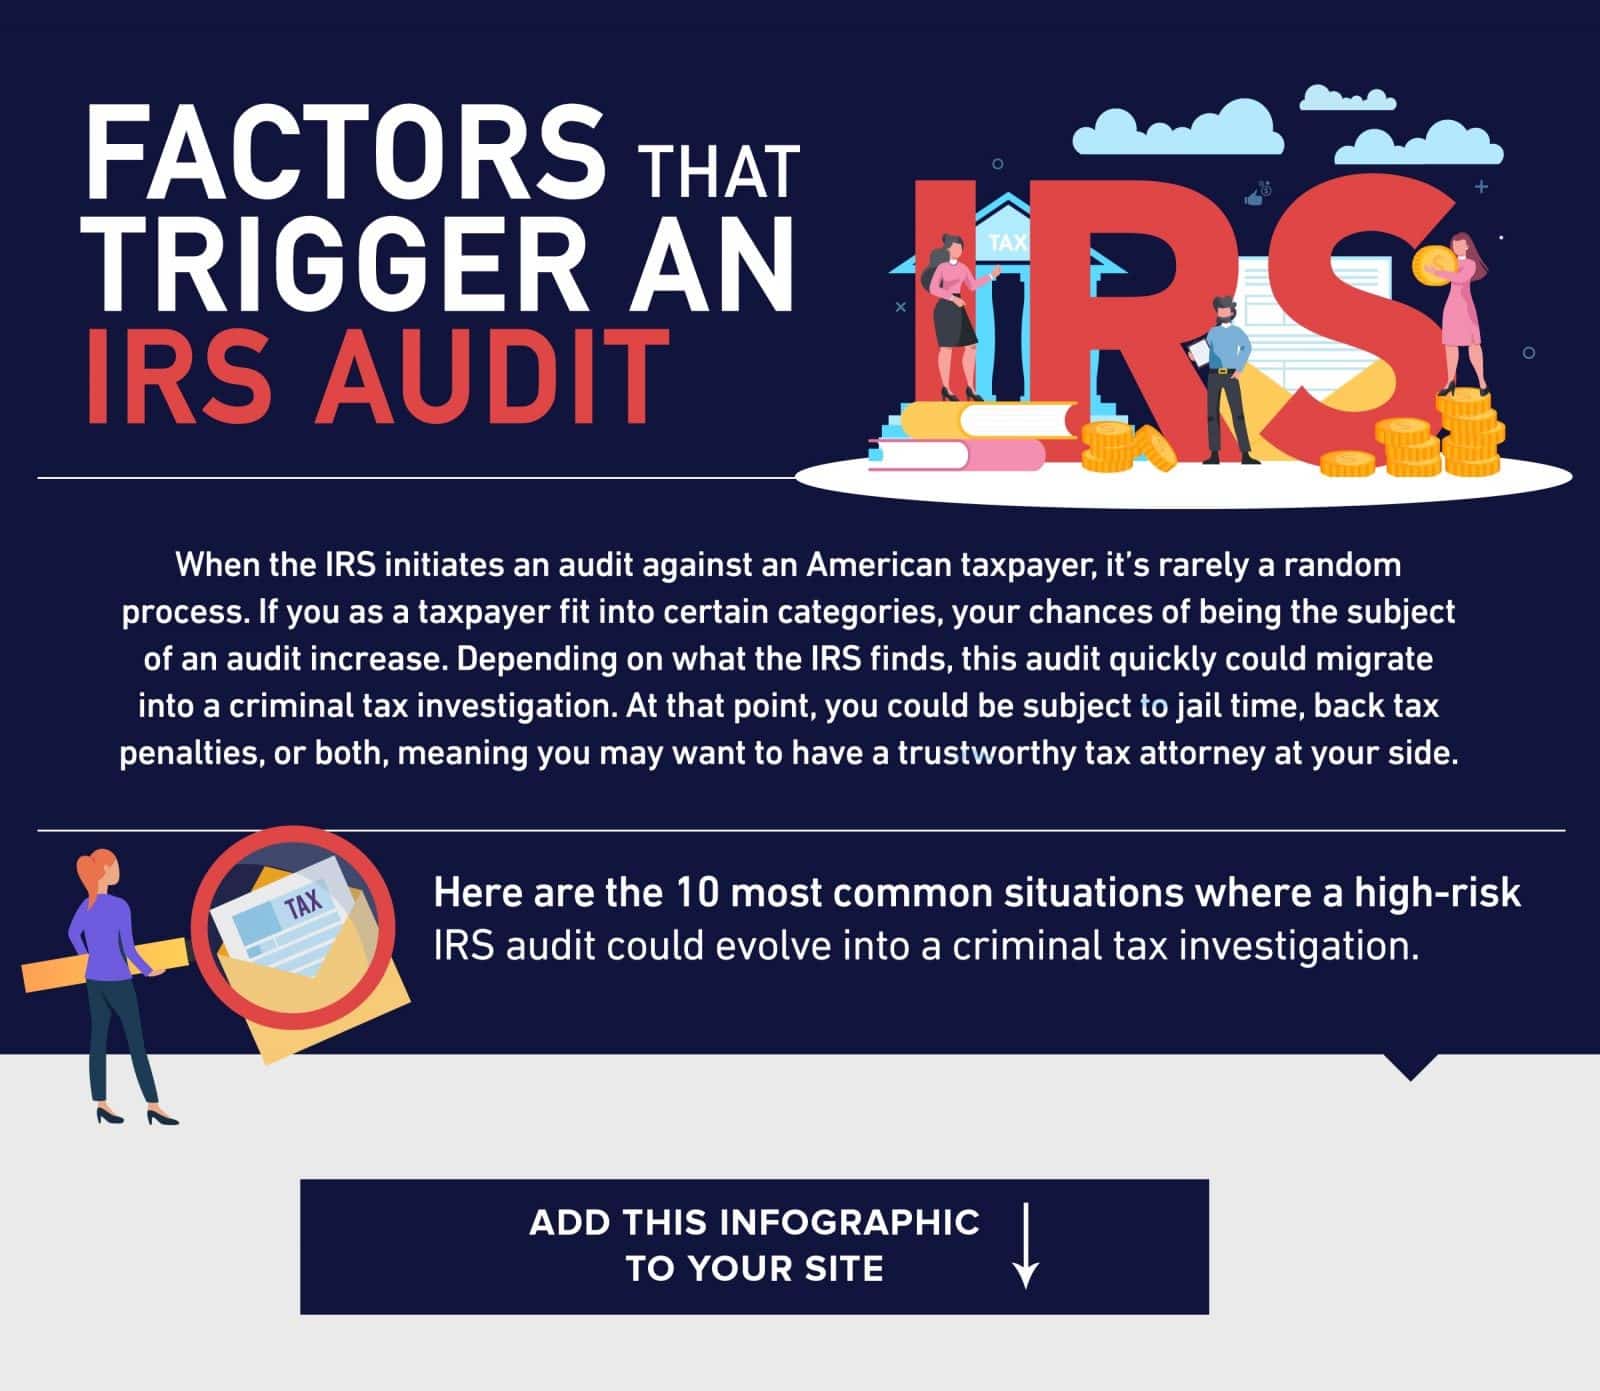 Factors that trigger an IRS audit infographic header